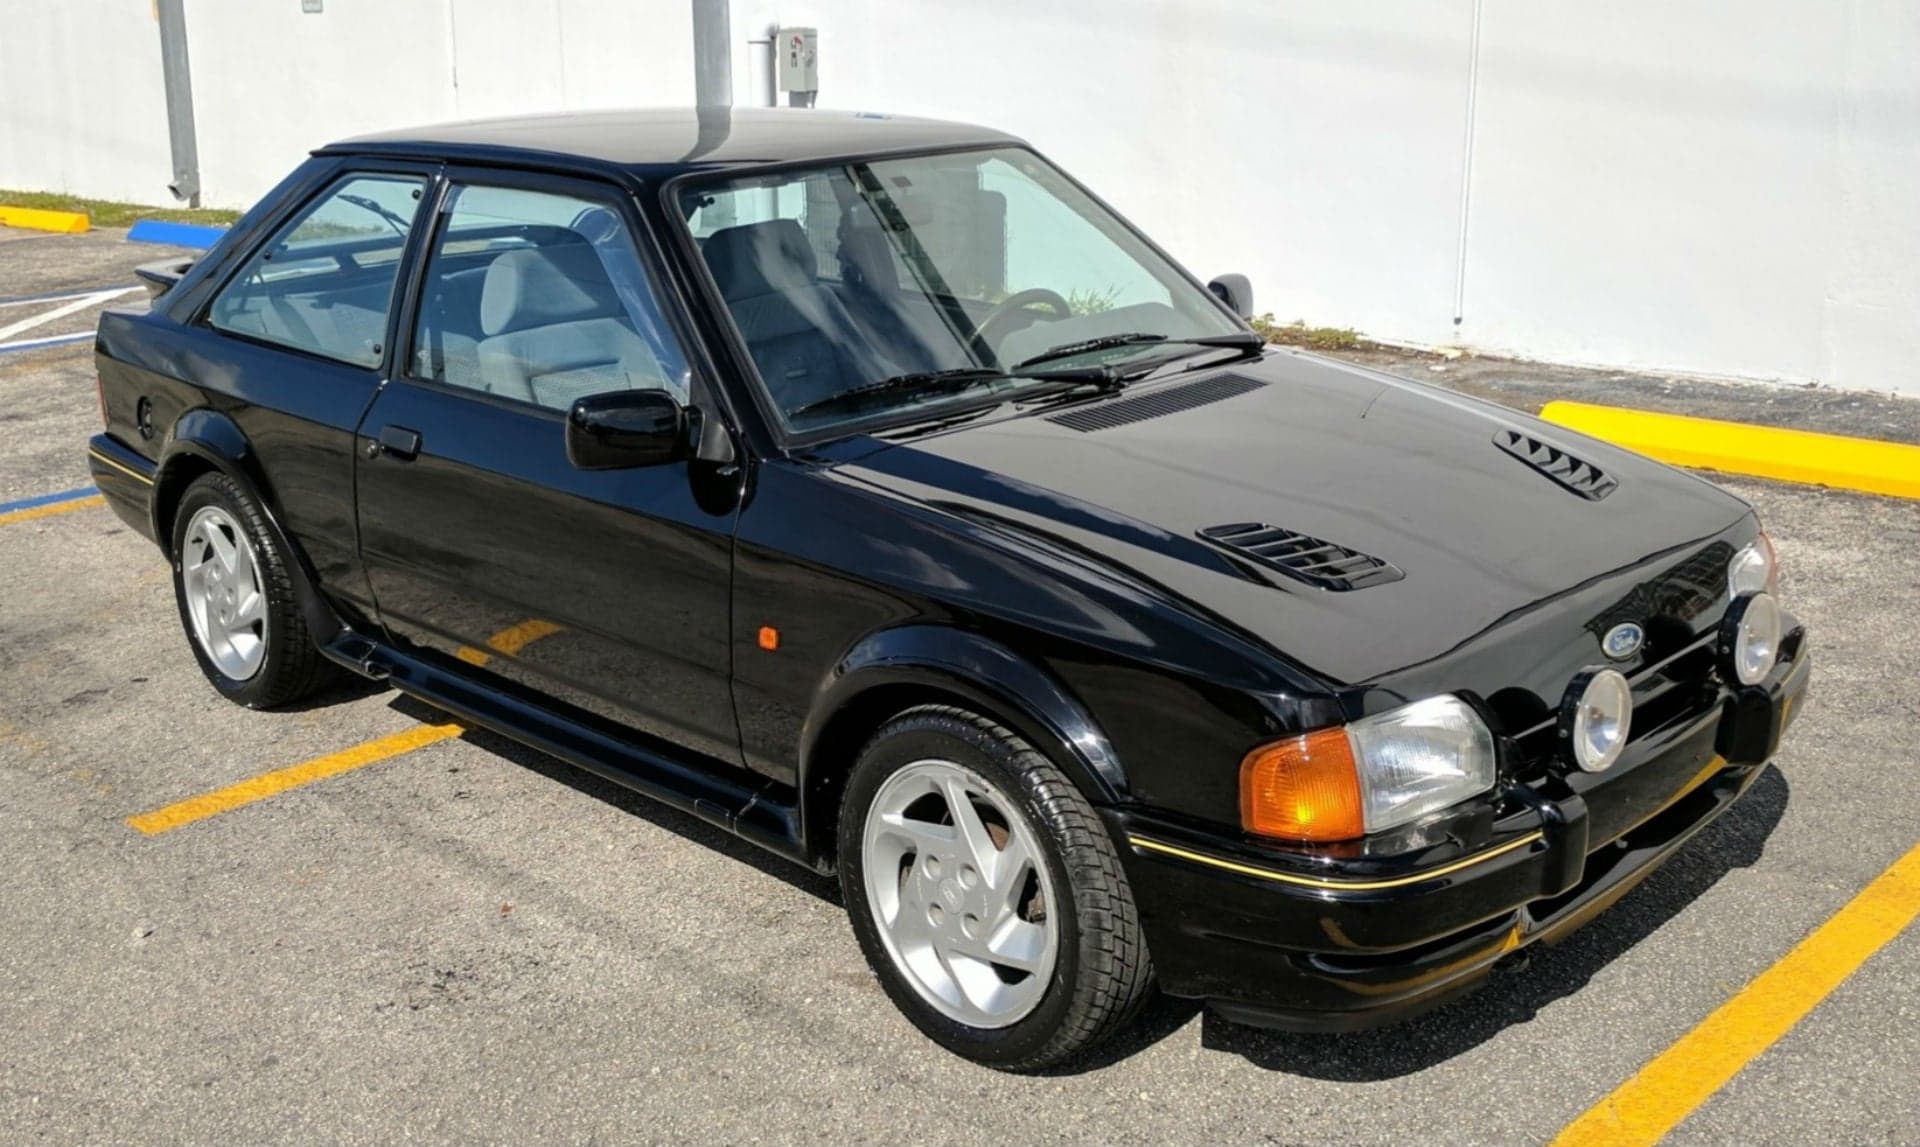 This 1988 Ford Escort RS Turbo Is America’s Forbidden Rally Fruit, and Now You Can Buy It